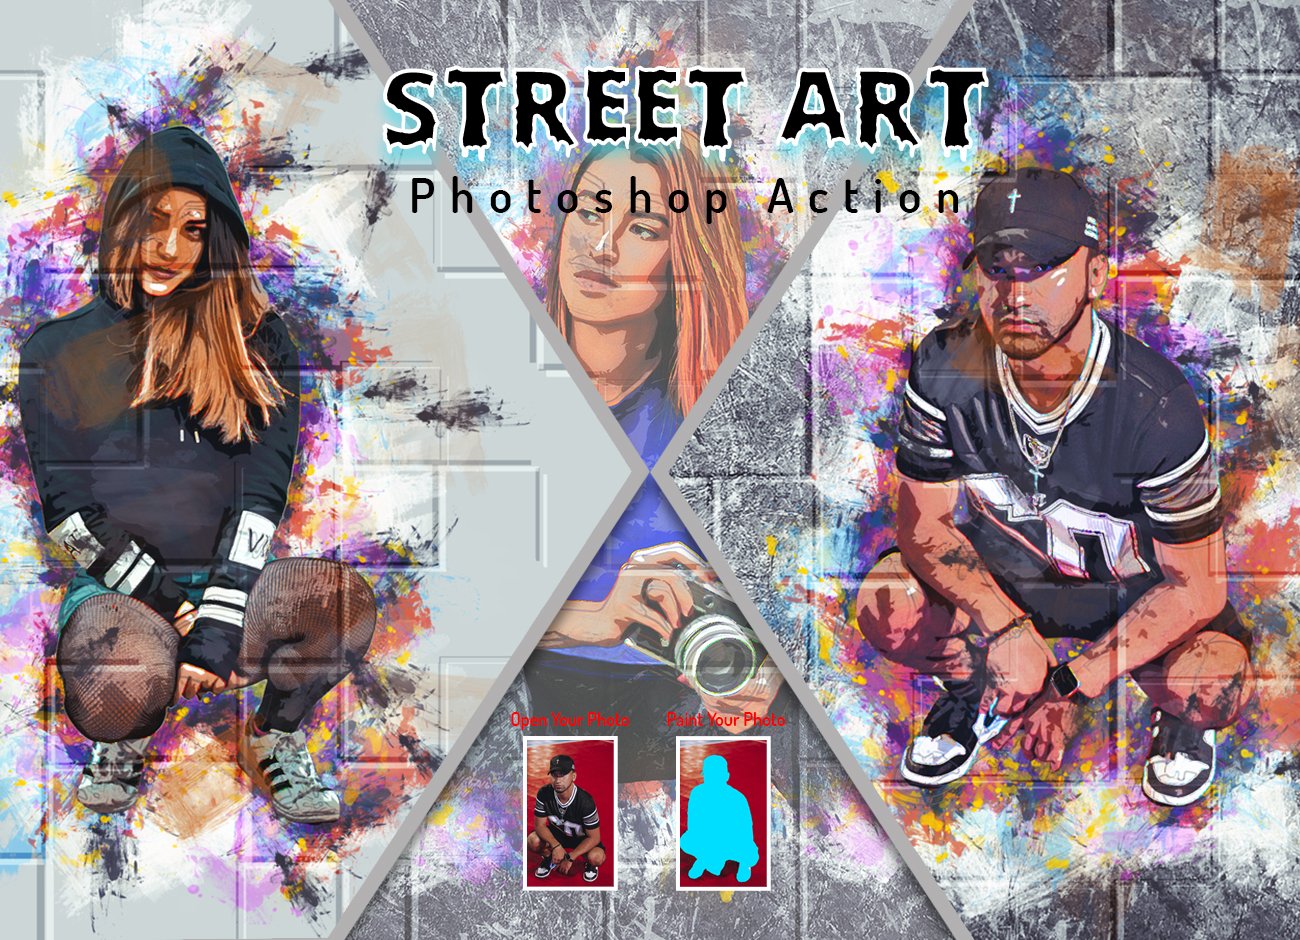 Street Art Photoshop Actioncover image.